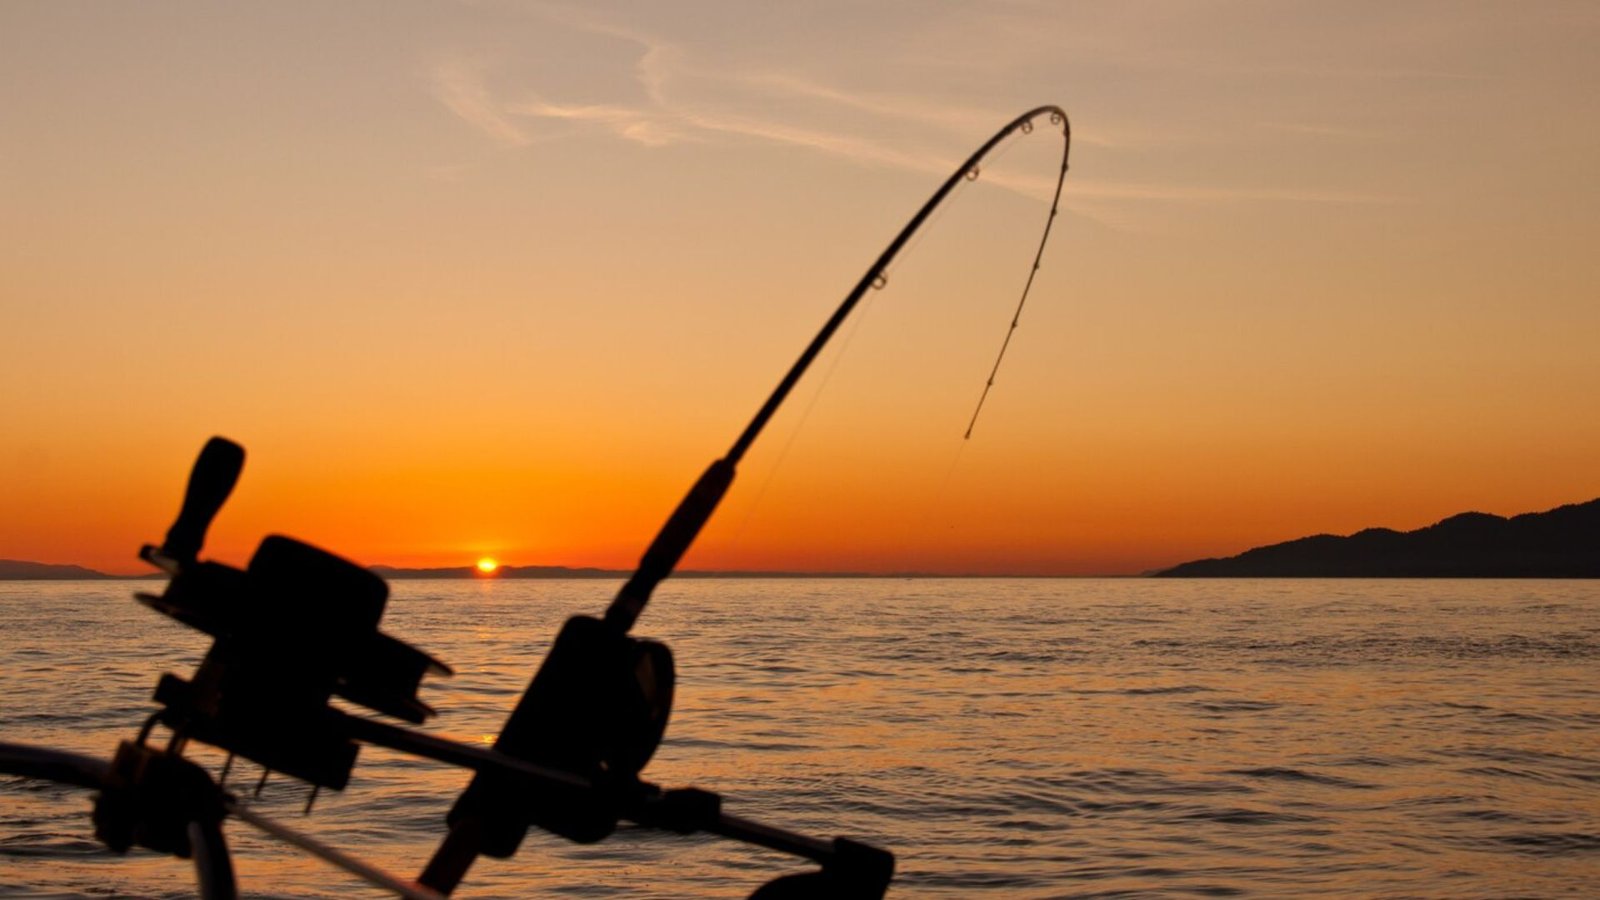 sunset landscape with a fishing rod